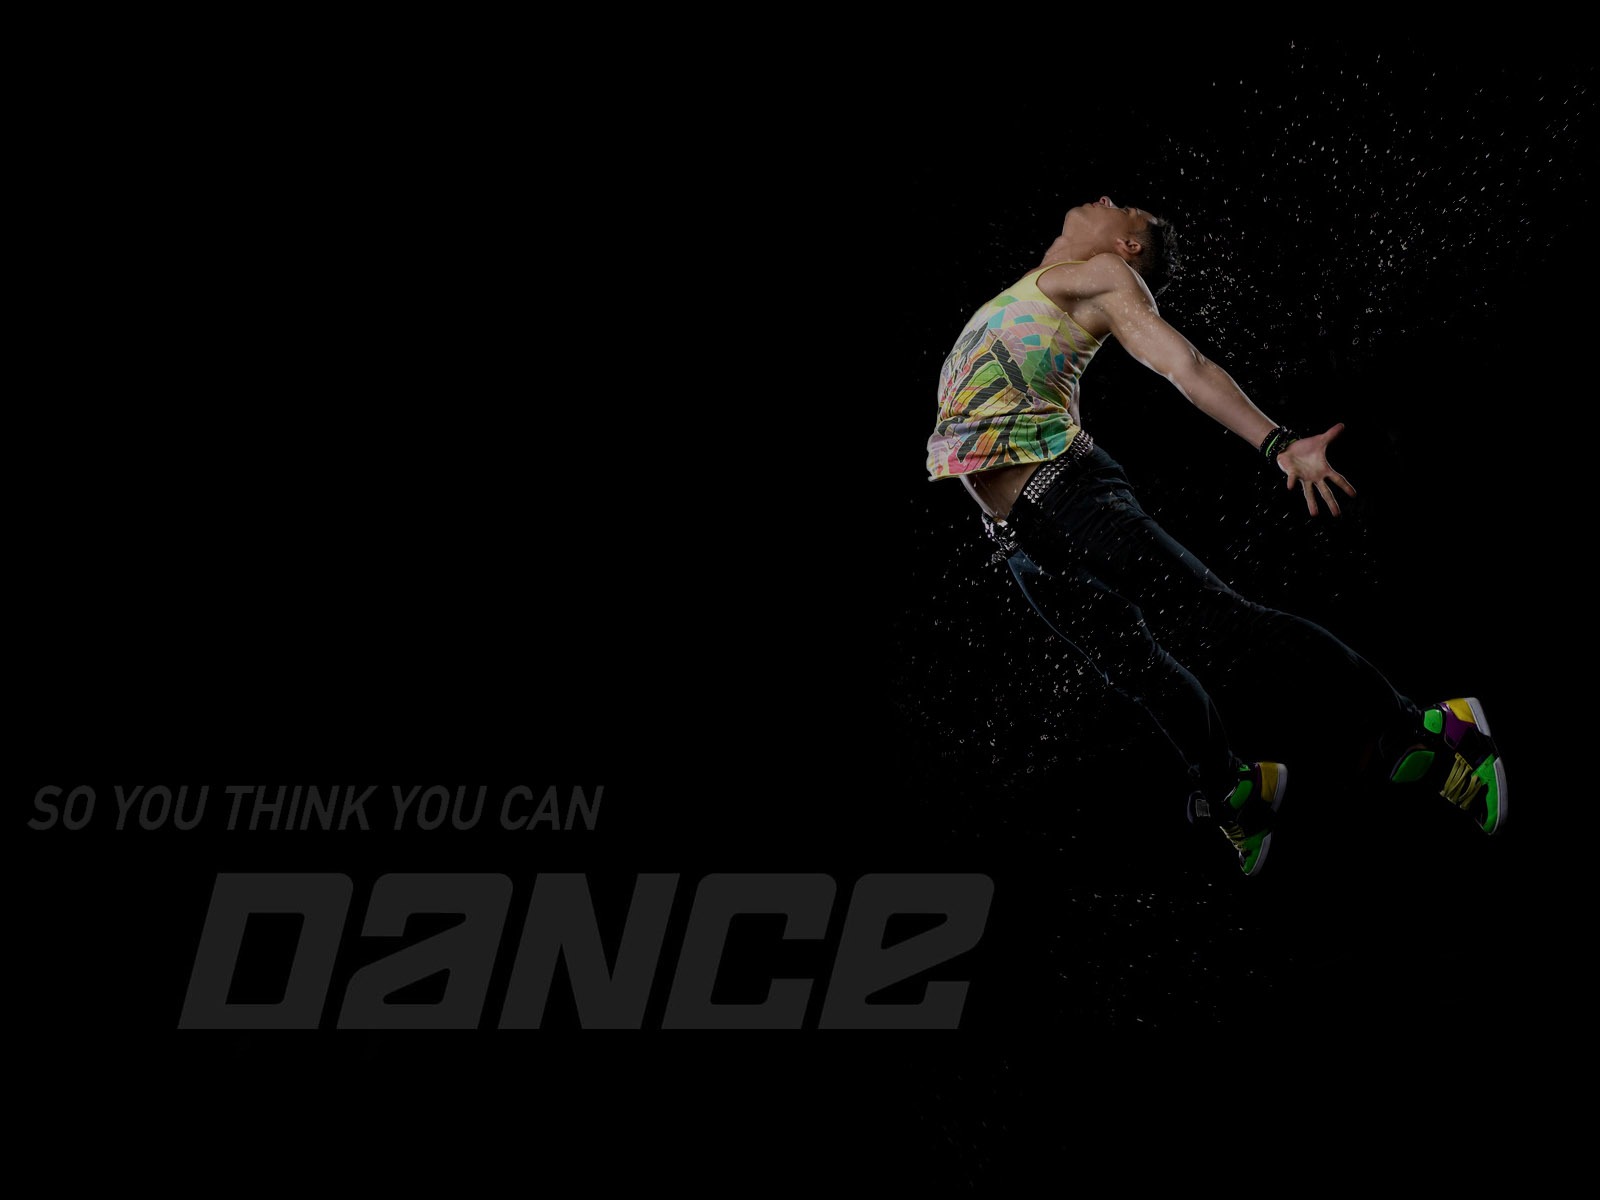 So You Think You Can Dance 舞林争霸 壁纸(二)6 - 1600x1200